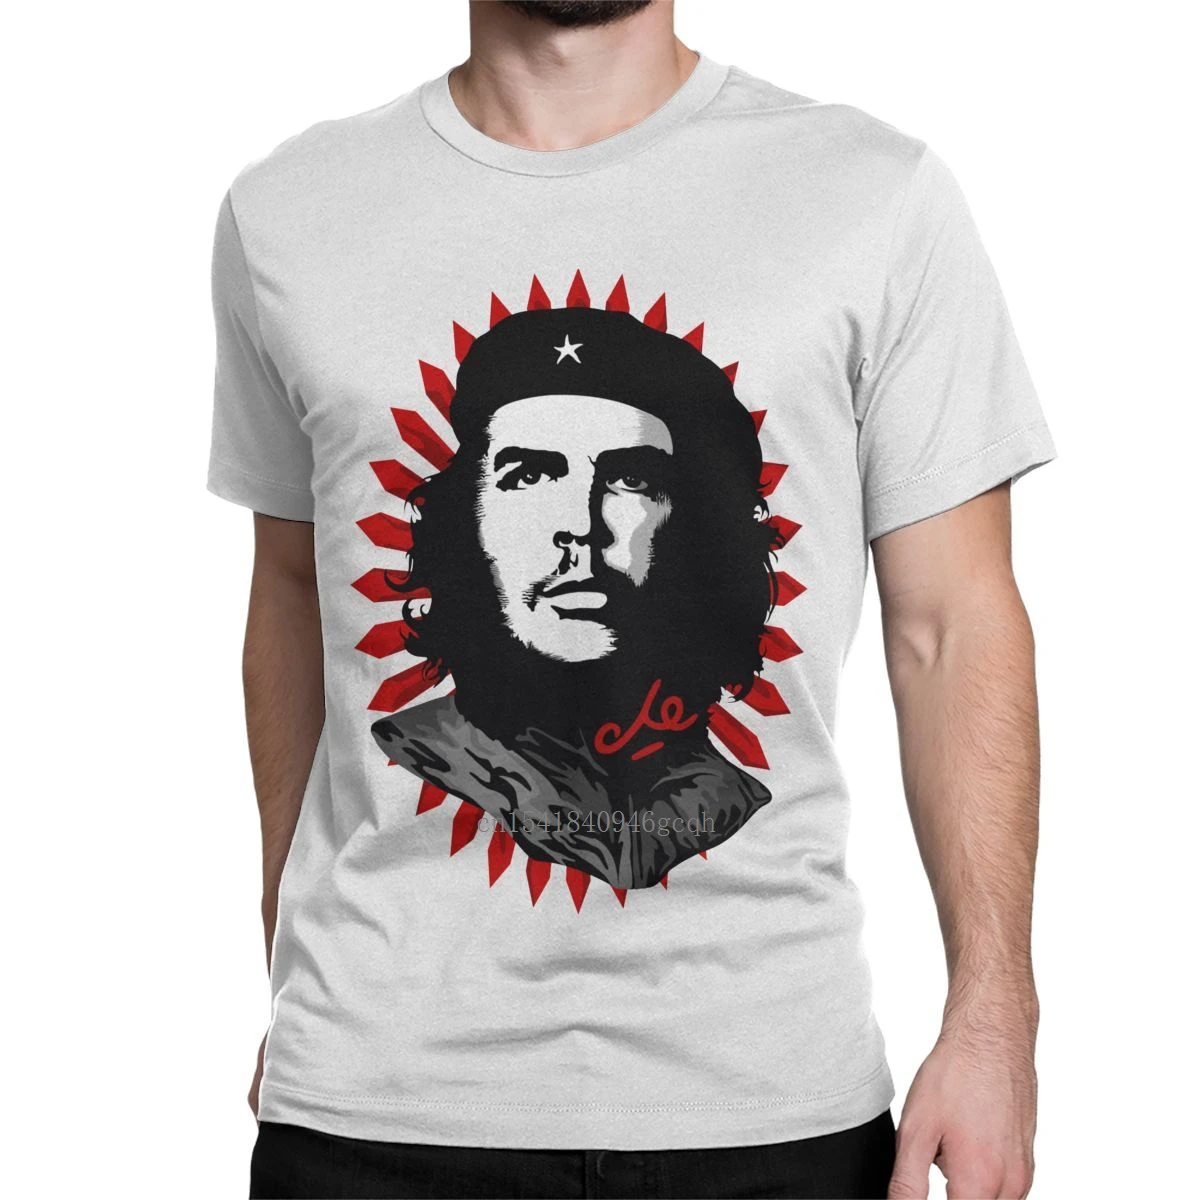 

El Che Guevara Iconic Portrait On Abstract Red Sun T Shirt Men Pure Cotton T-Shirts Freedom Cuba Tee Shirt Clothing New Arrival